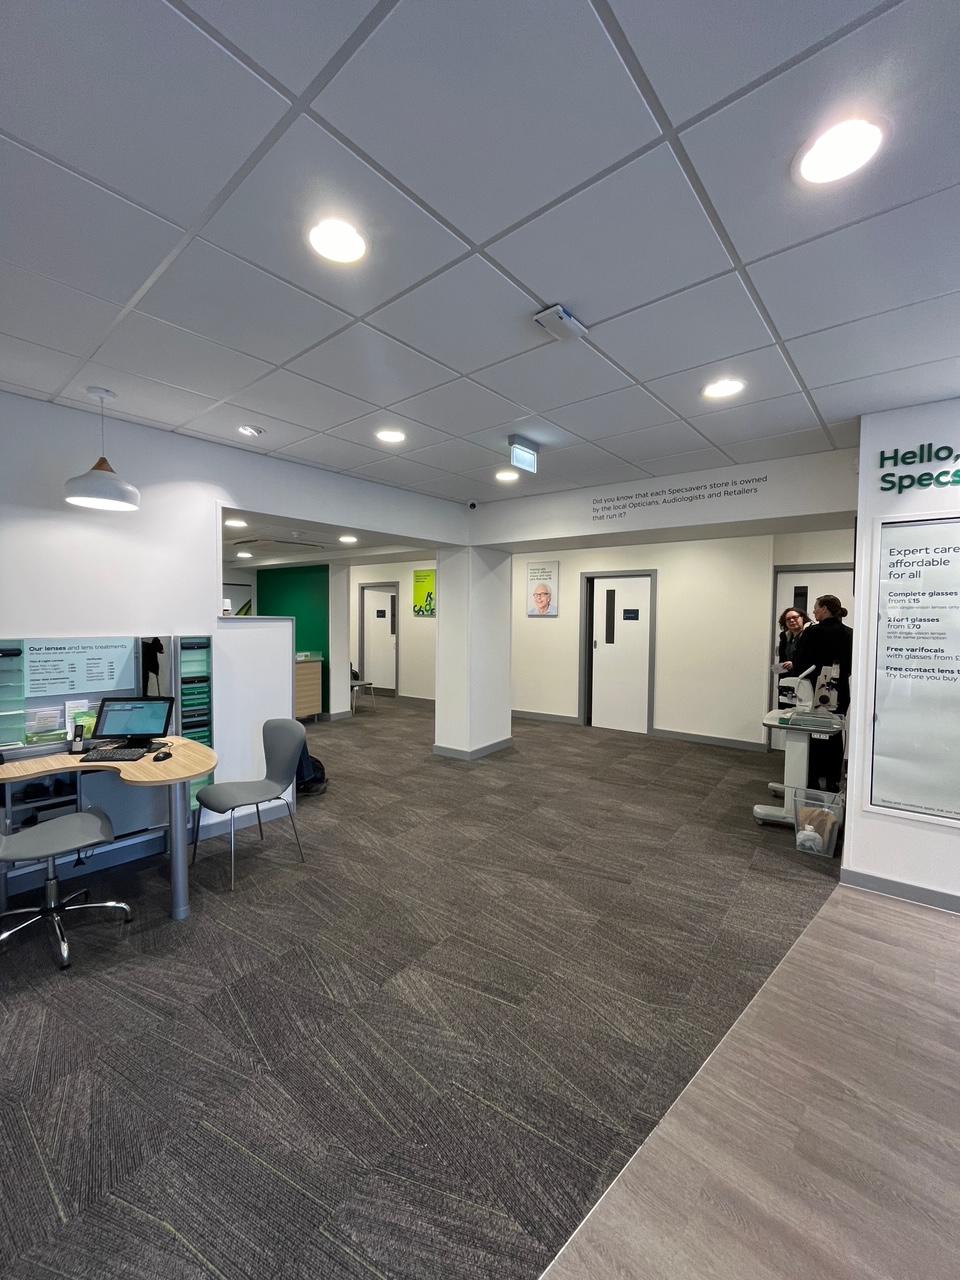 Images Specsavers Opticians and Audiologists - Beeston